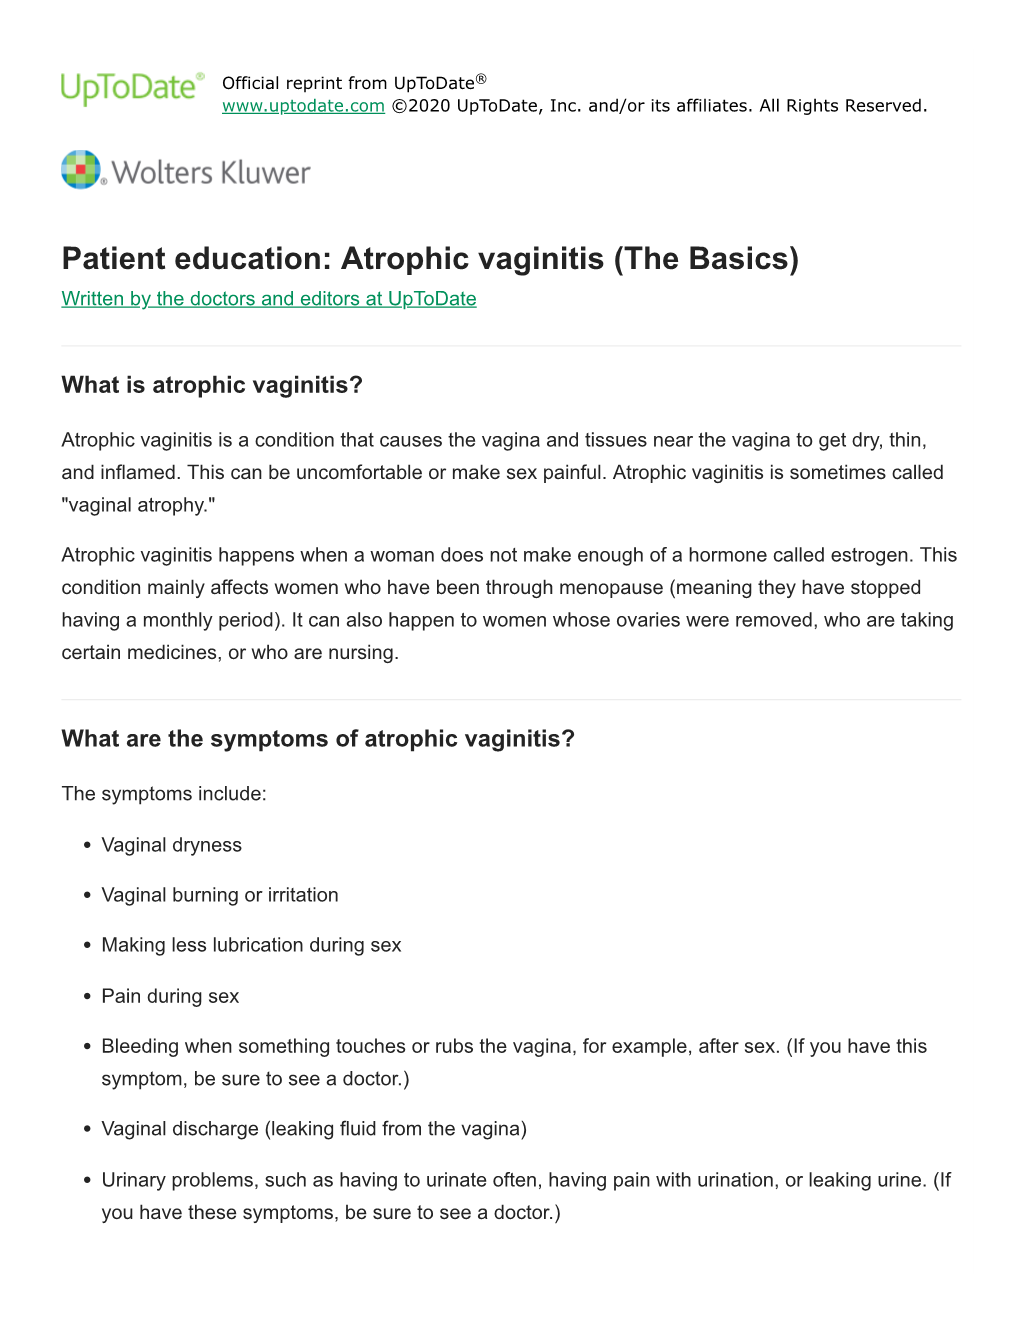 Atrophic Vaginitis (The Basics) Written by the Doctors and Editors at Uptodate